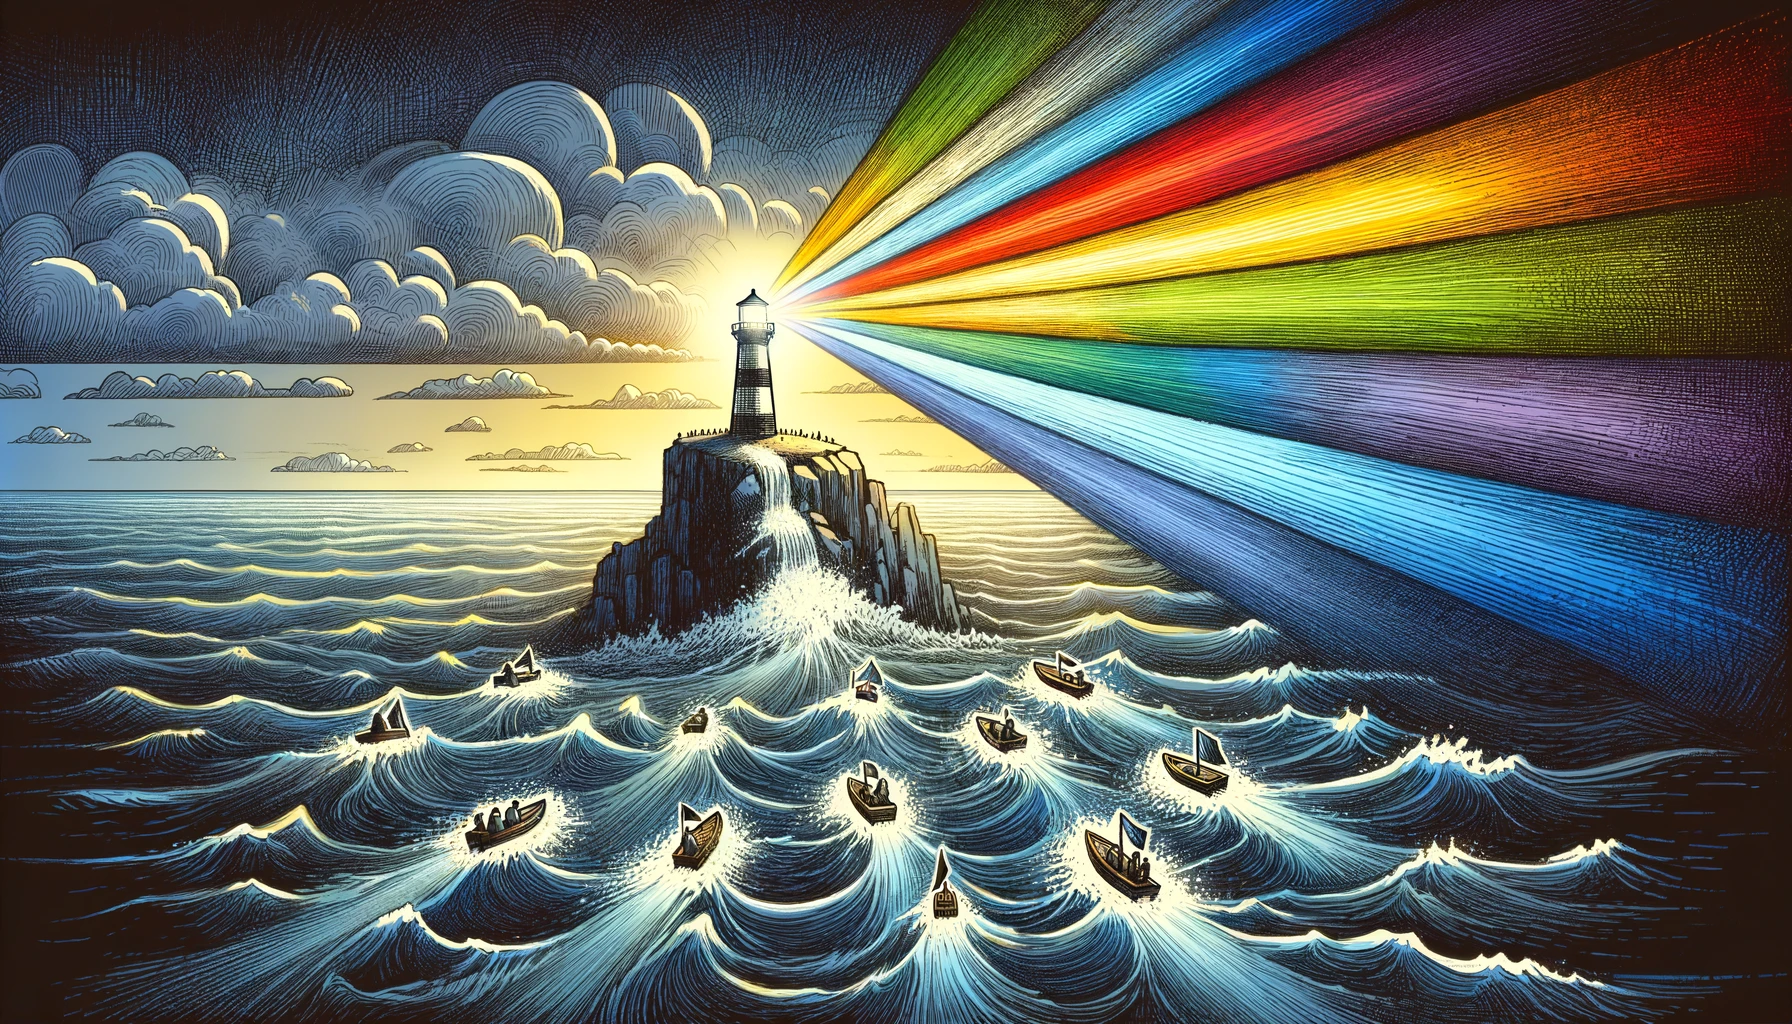 A lighthouse stands tall on a rugged cliff, emitting a powerful, multi-colored beam of light that pierces through a dark, stormy sea below. The beam, in shades of light gray, dark gray, bright red, yellow, and blue, guides small boats carrying diverse internet users towards a calm, welcoming shore. This scene symbolizes the efforts of individuals and communities to navigate through the chaotic and often hostile digital ocean, seeking safe, inclusive online environments. The lighthouse serves as a beacon of hope and guidance amidst the tumultuous waters, representing the importance of creating a supportive and protective space for all users in the vast digital landscape.